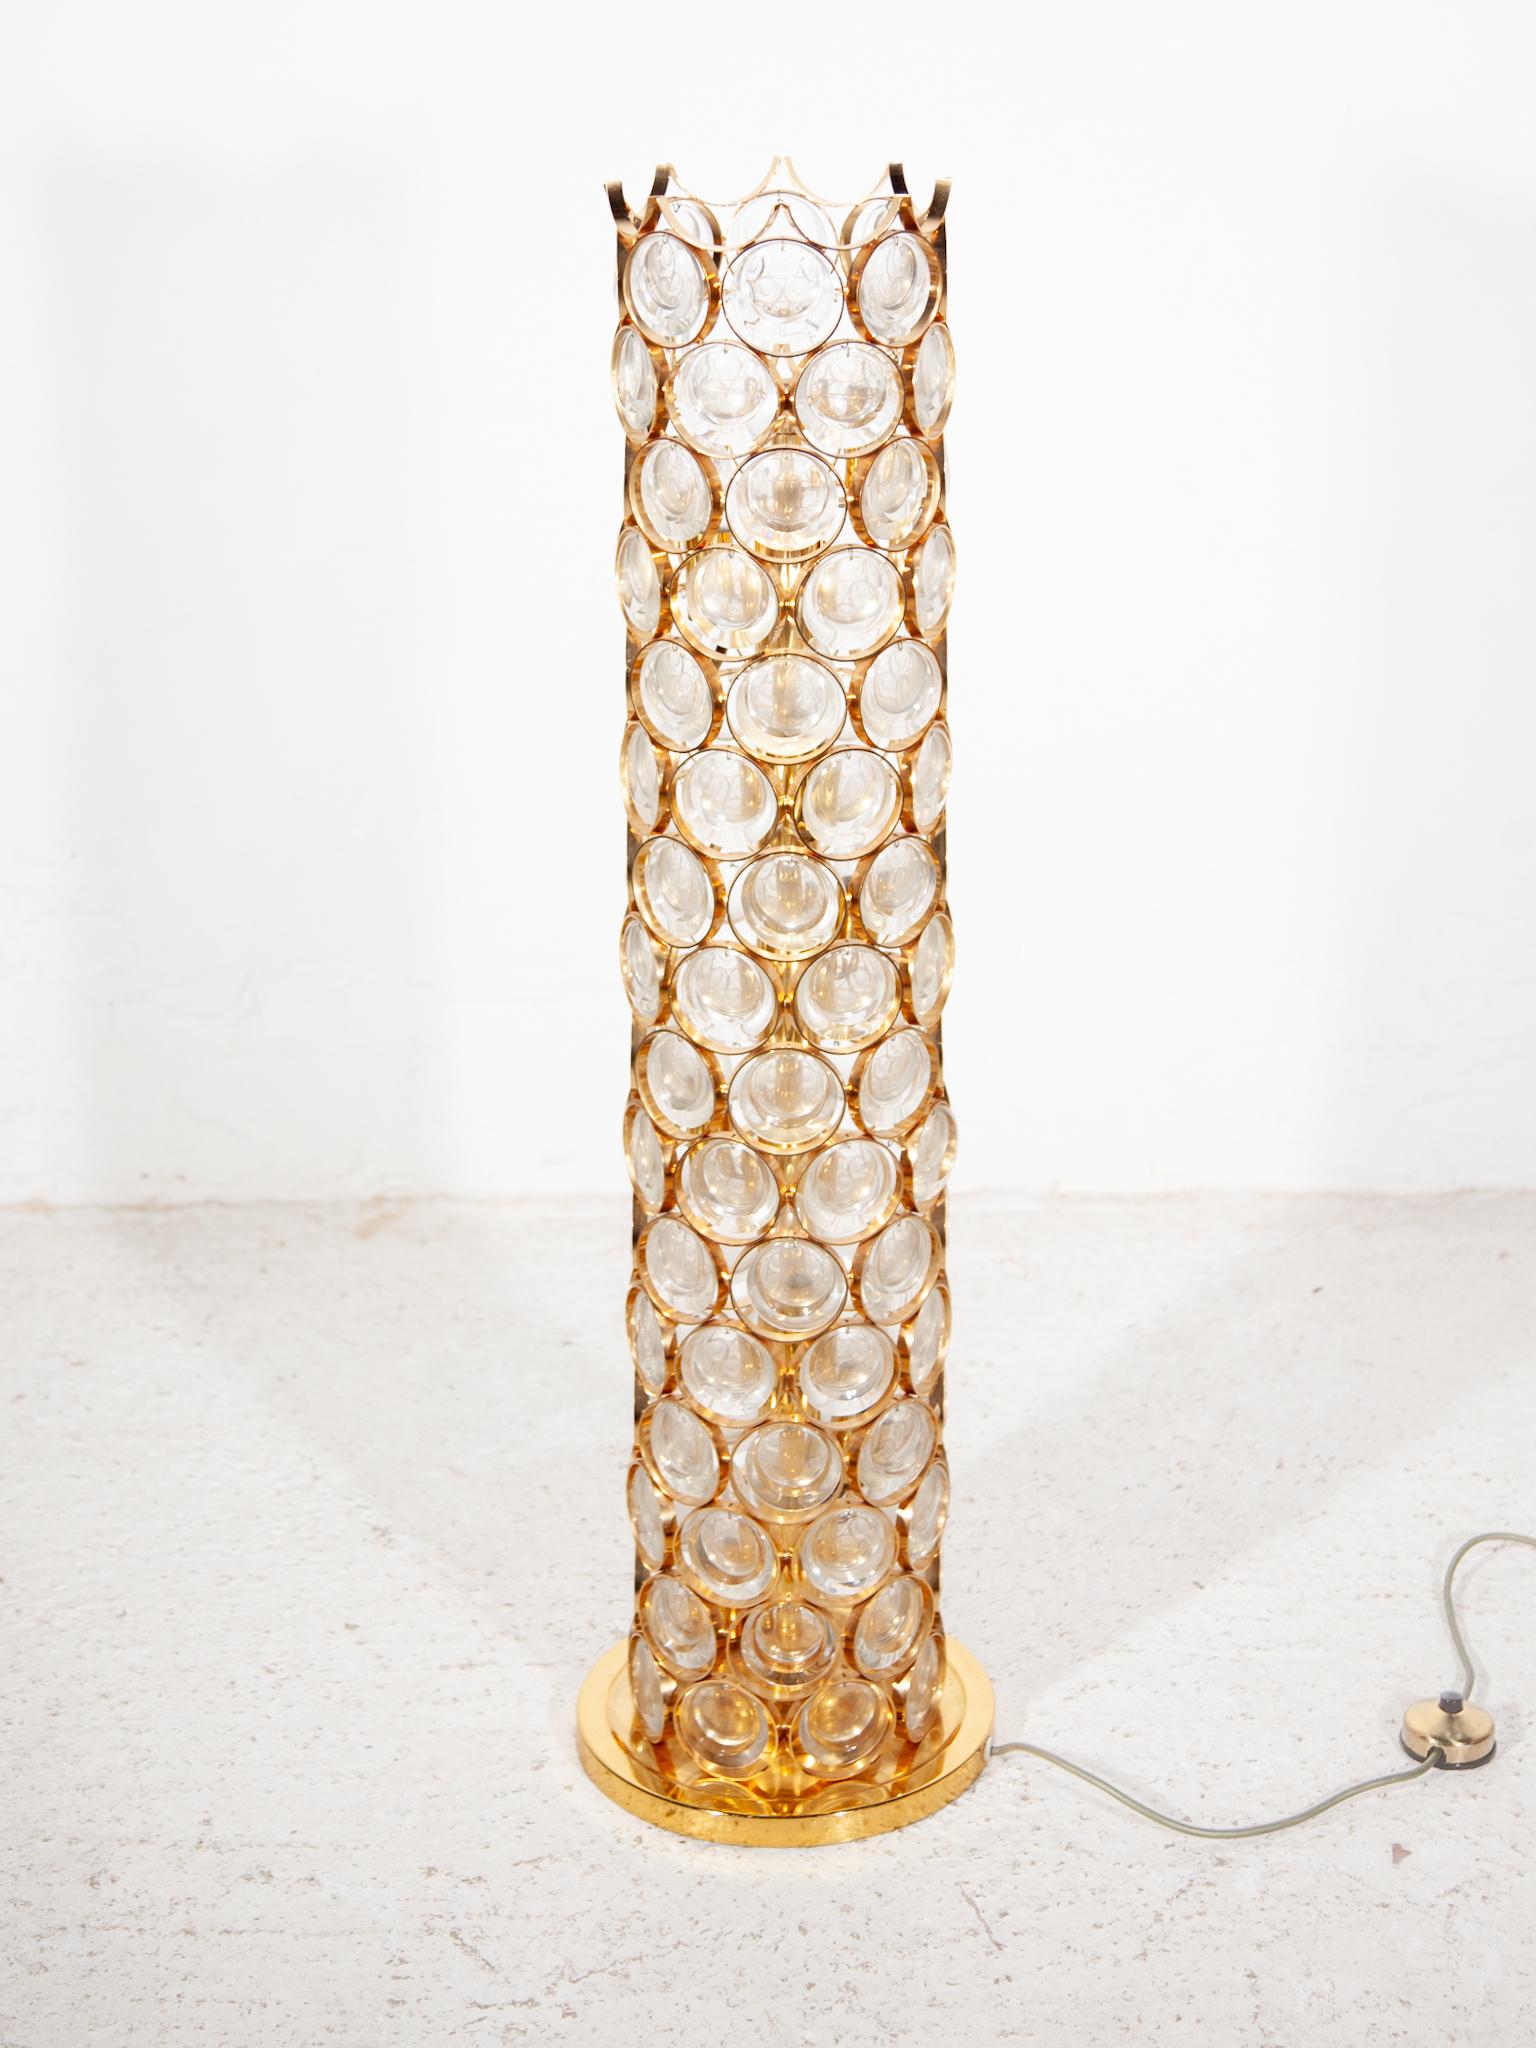 Very rare Hollywood Regency Floor Lamp designed by Palwa, Germany, 1970s. Features a gilded brass base, rod and stacking lamp shades with round gilded rings and hanging facetted clear crystal discs.

10 Bakelite E14 sockets.

Palwa or Palme &